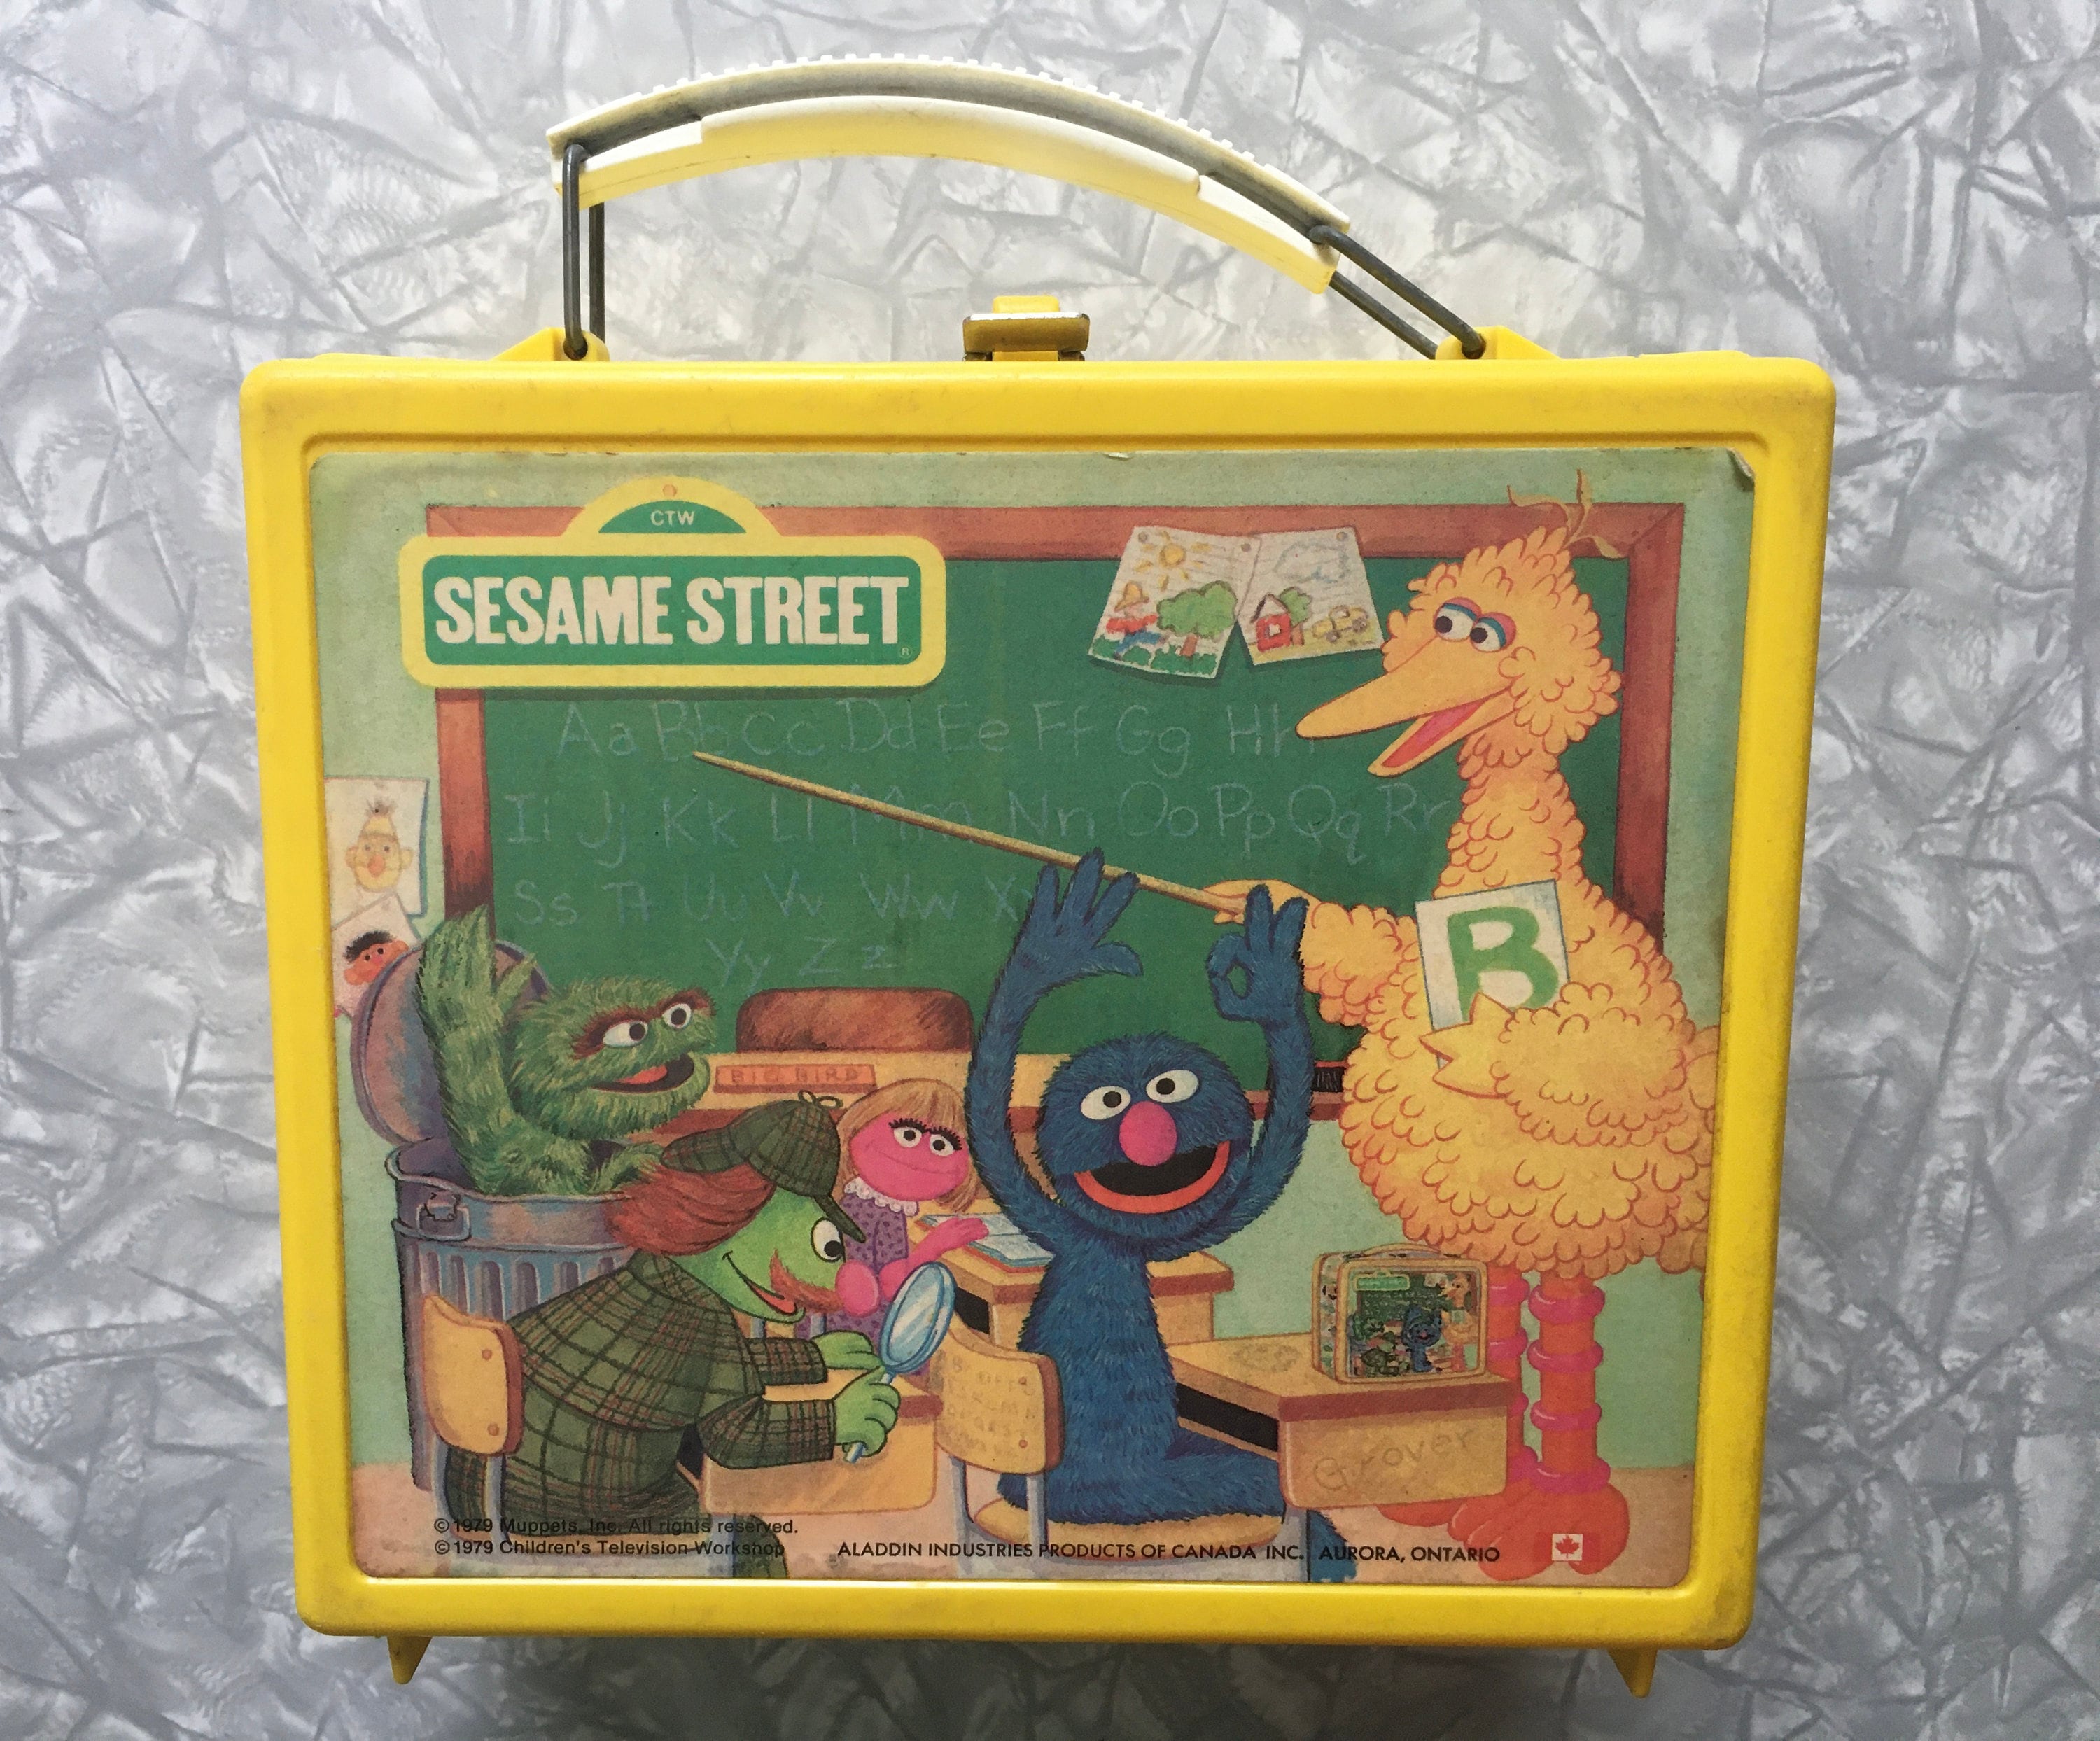 Flops in Space Lunch Box and Thermos vintage 80's 90's Orange Plastic Lunch  Box and Thermos Kid Complete School Set 90s Dog in Space 